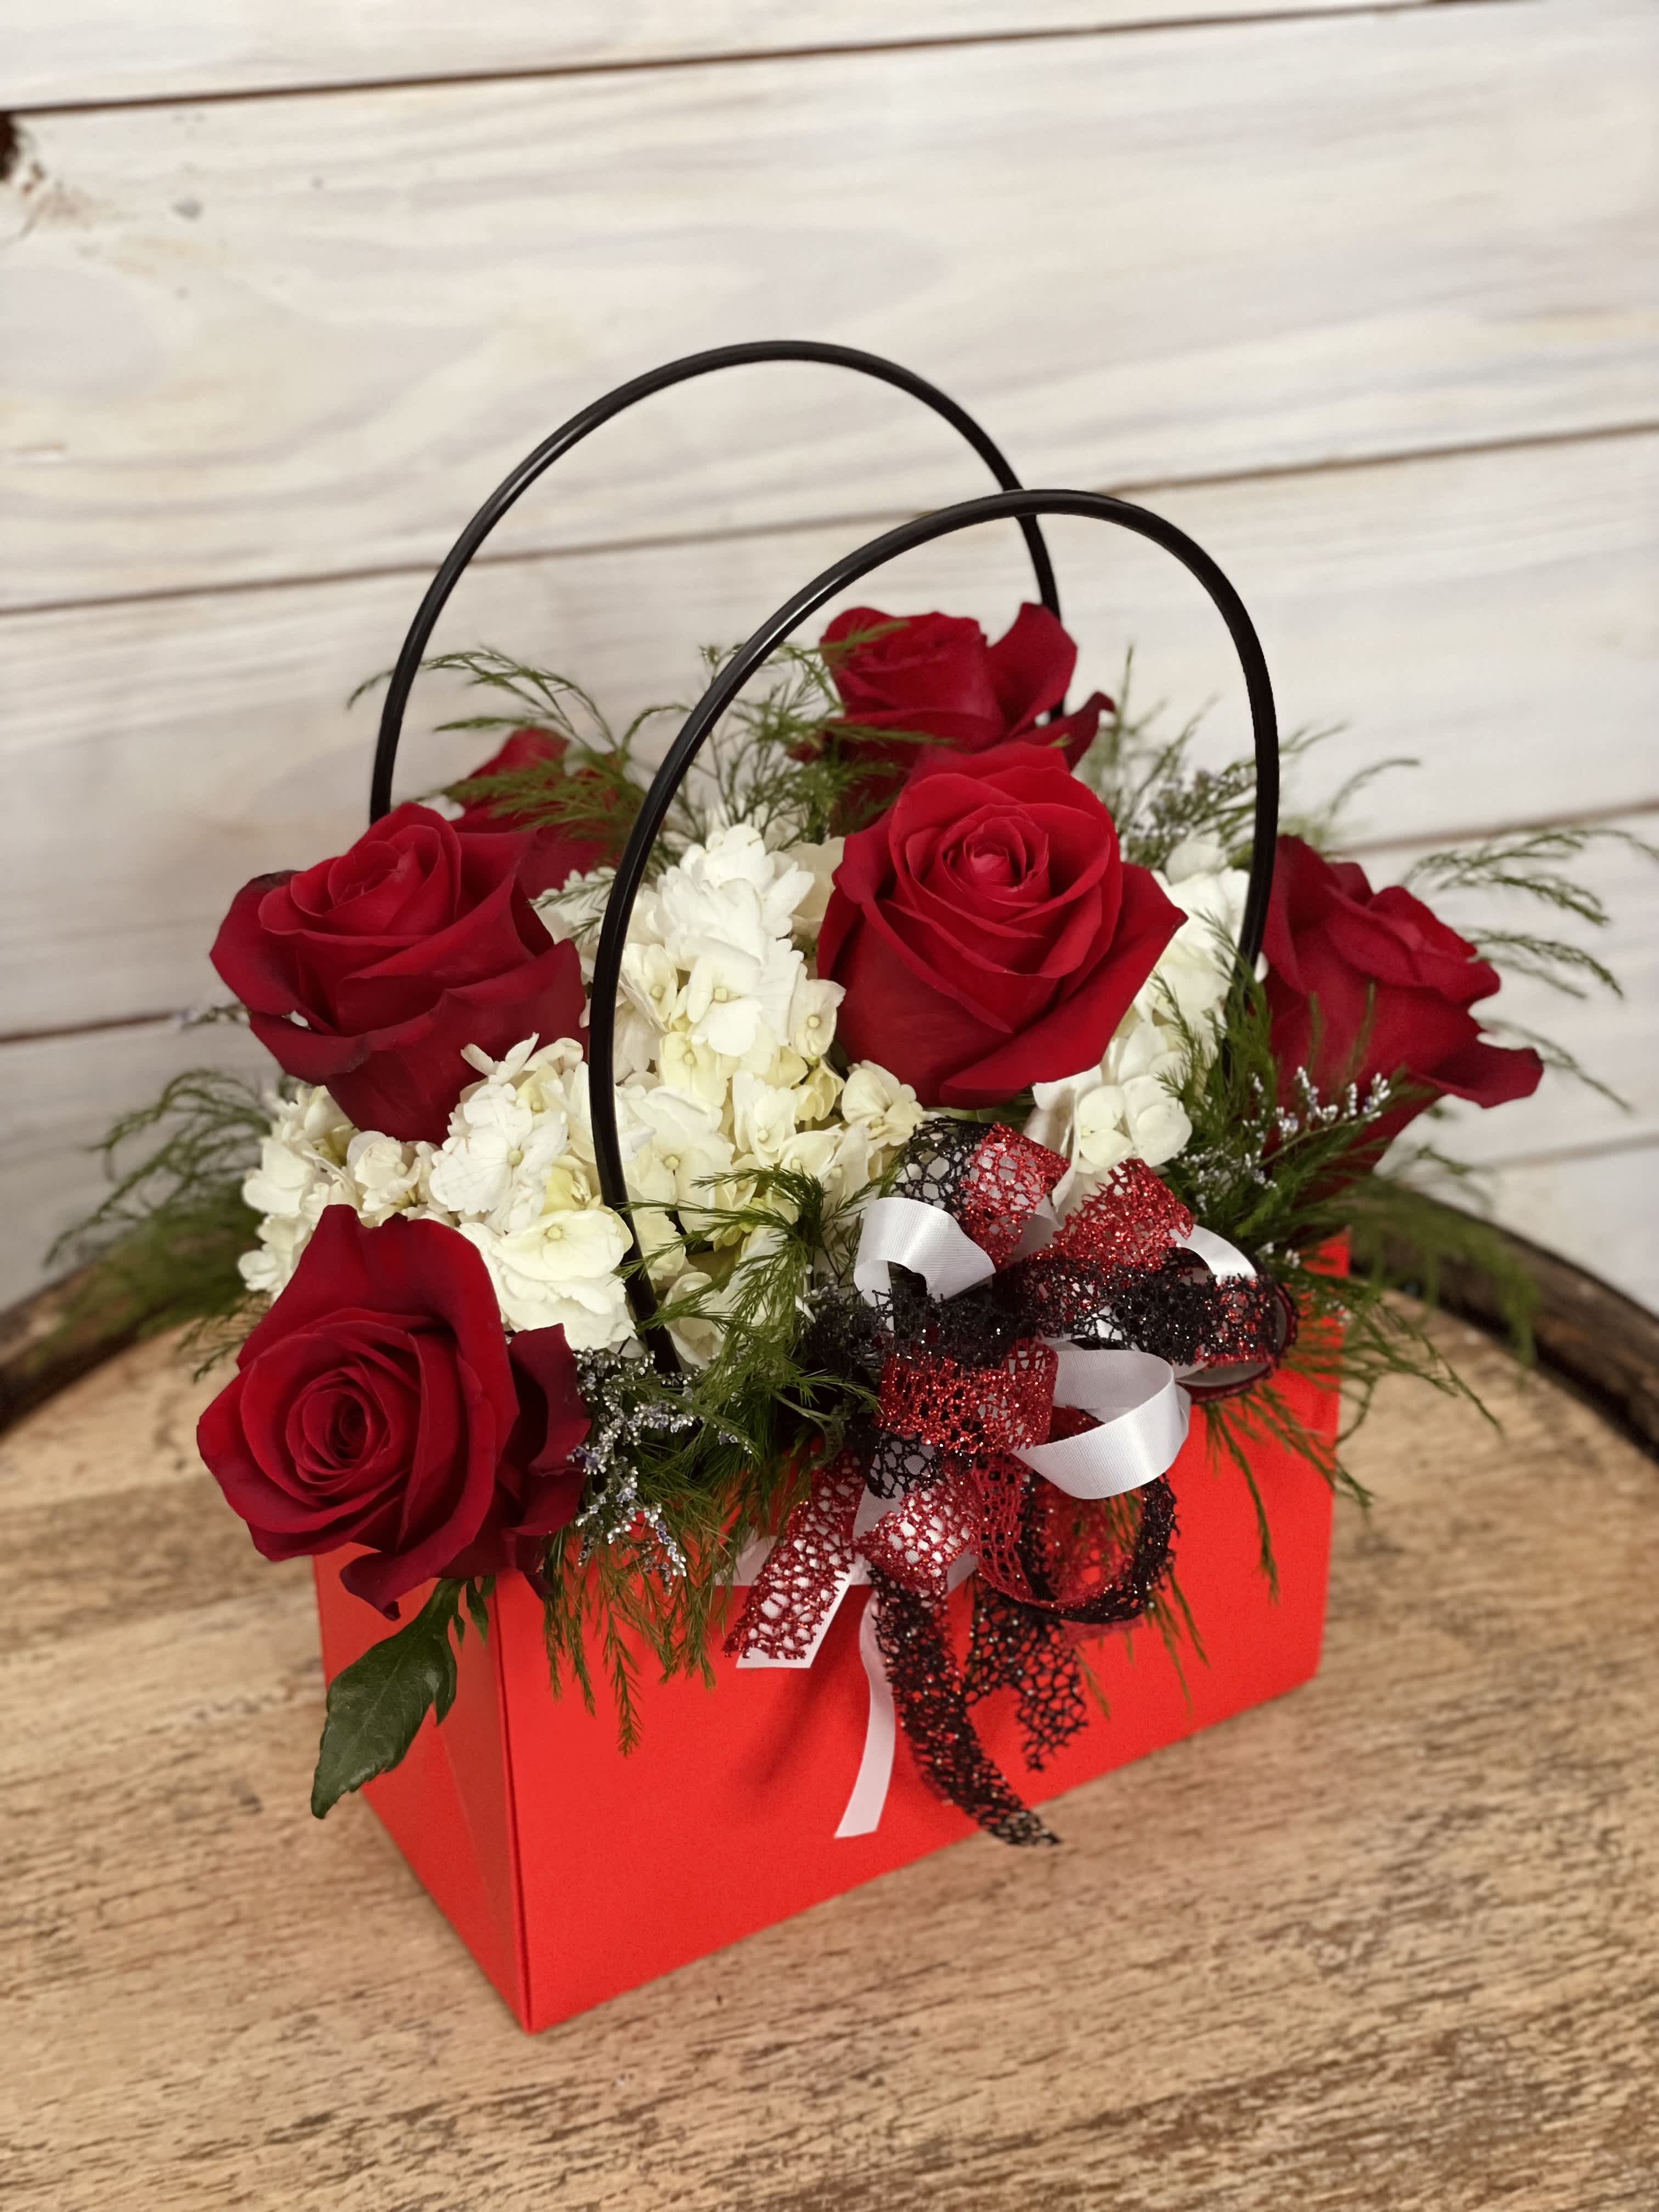 Queen - A royal red paper purse filler with white hydrangeas and red roses. Perfect for the Queen in your life!